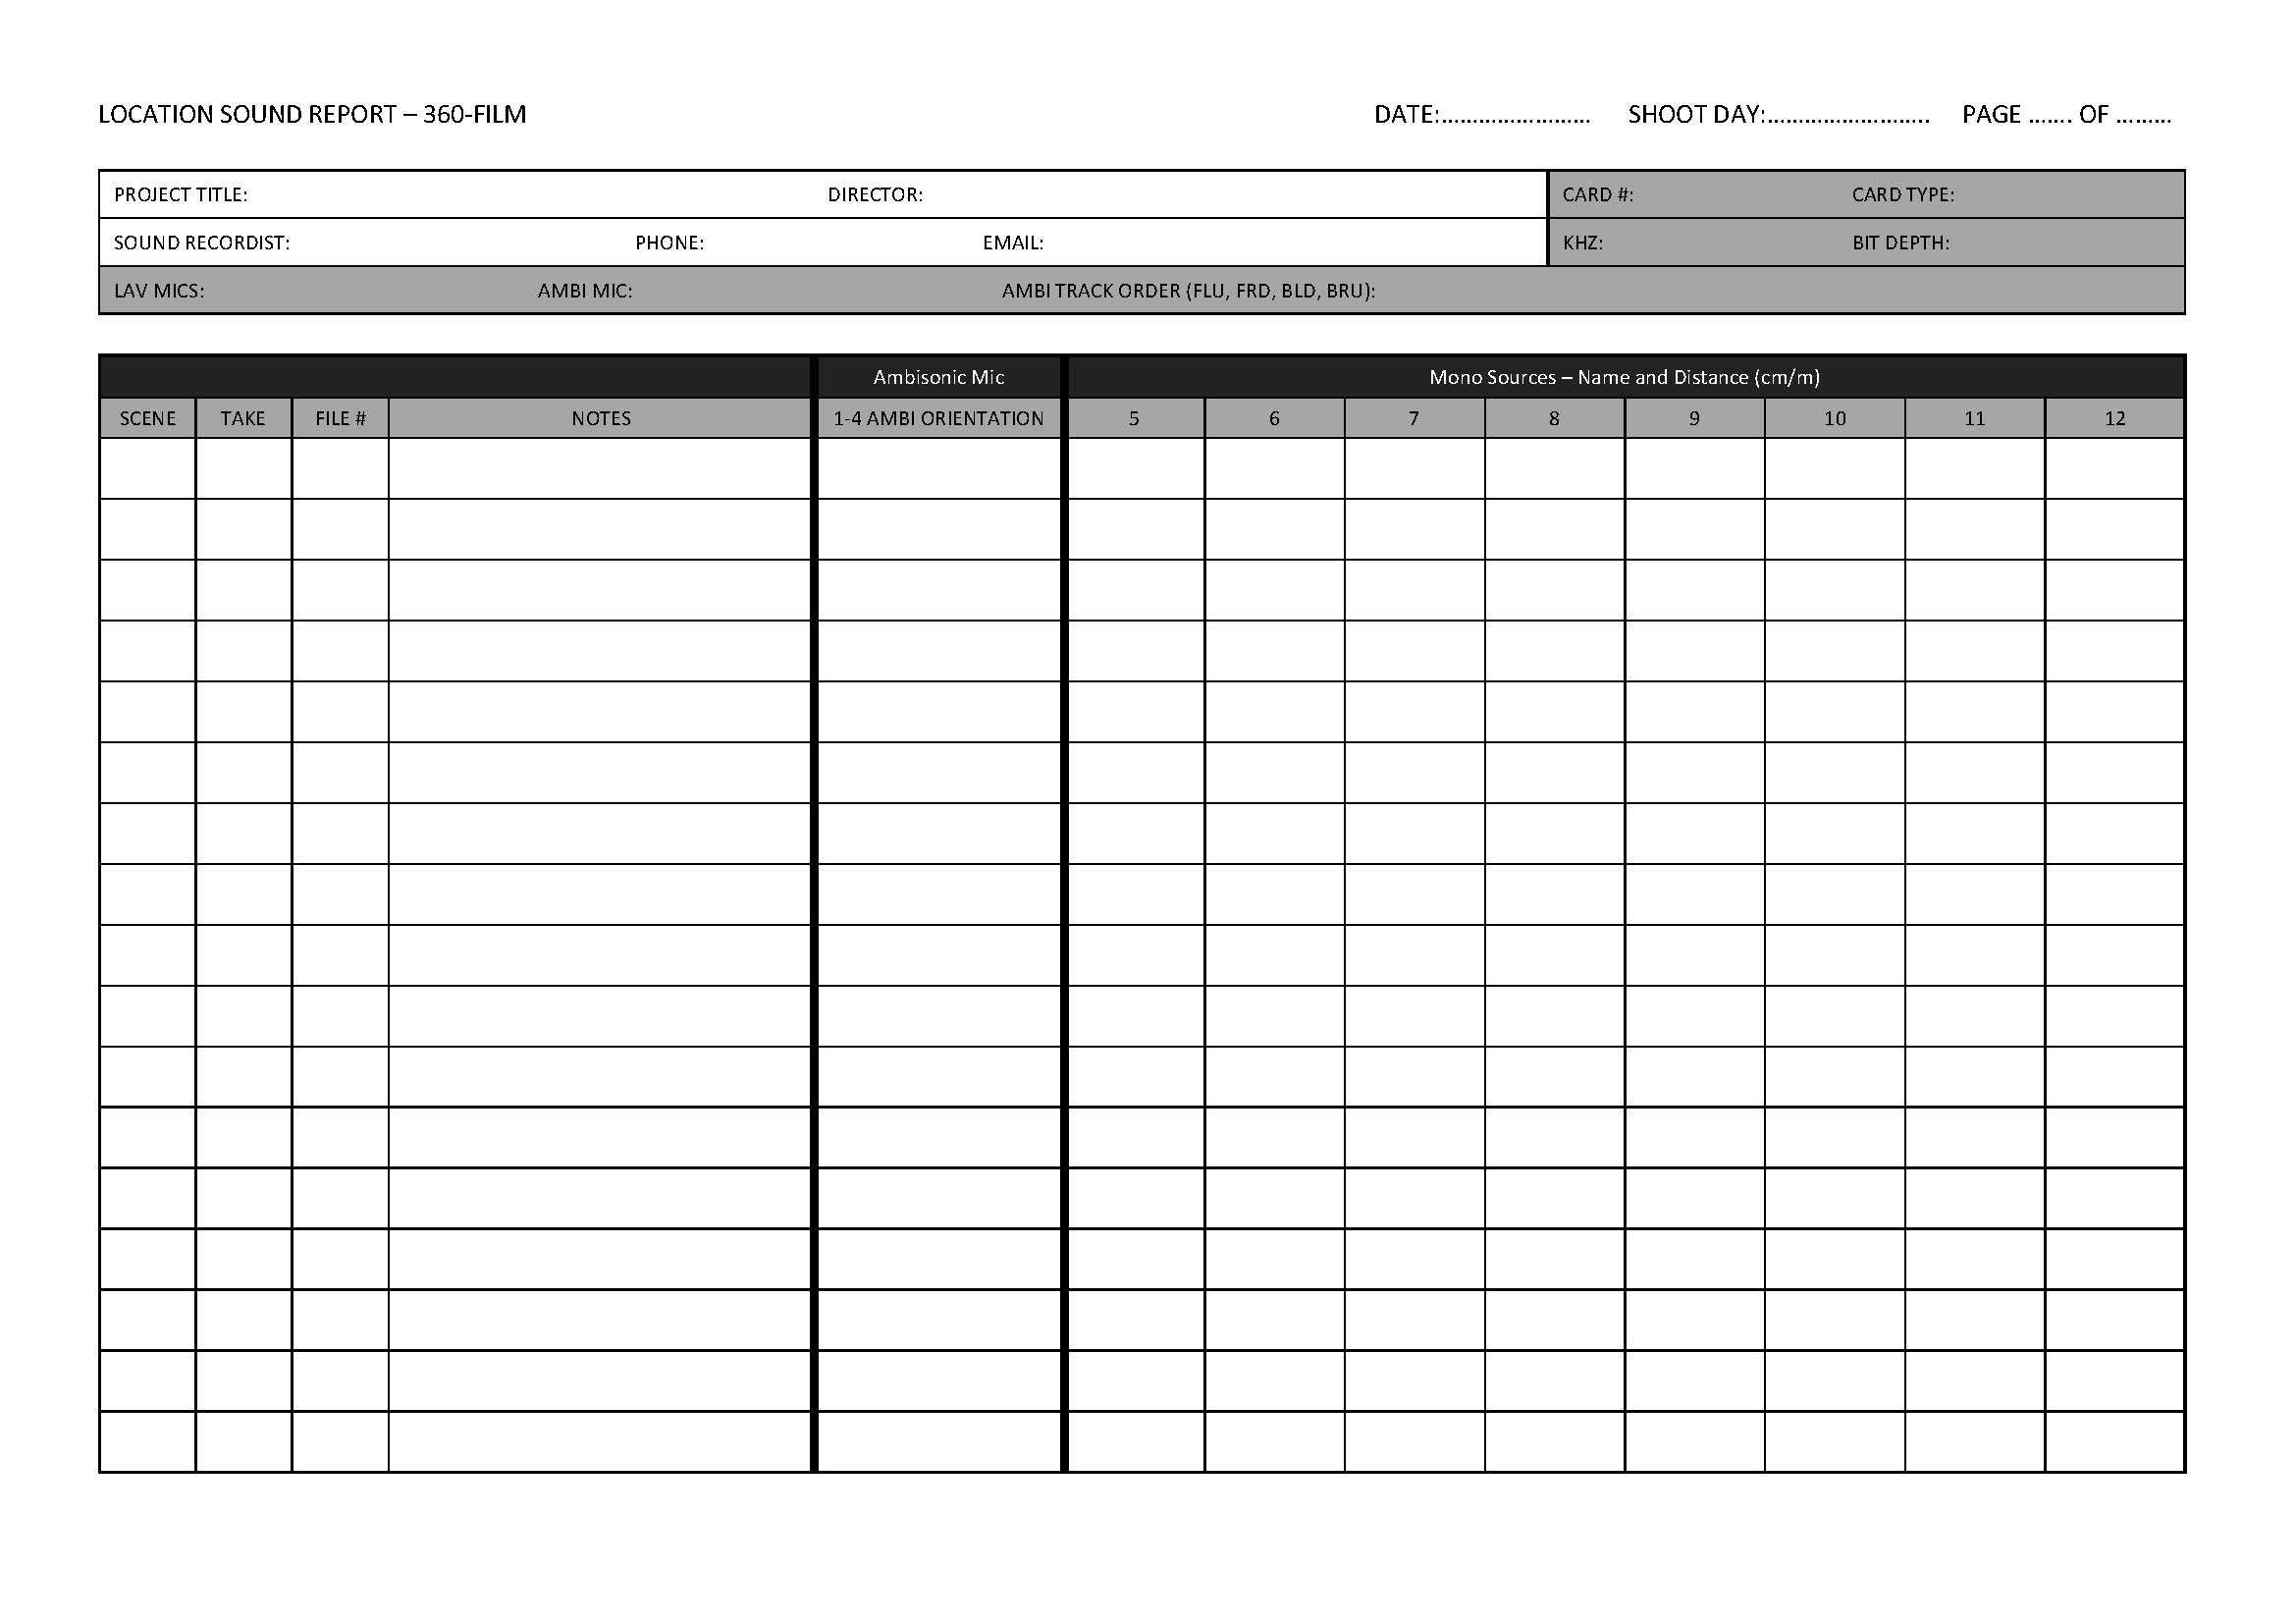 Beyond Reality Inside Sound Report Template